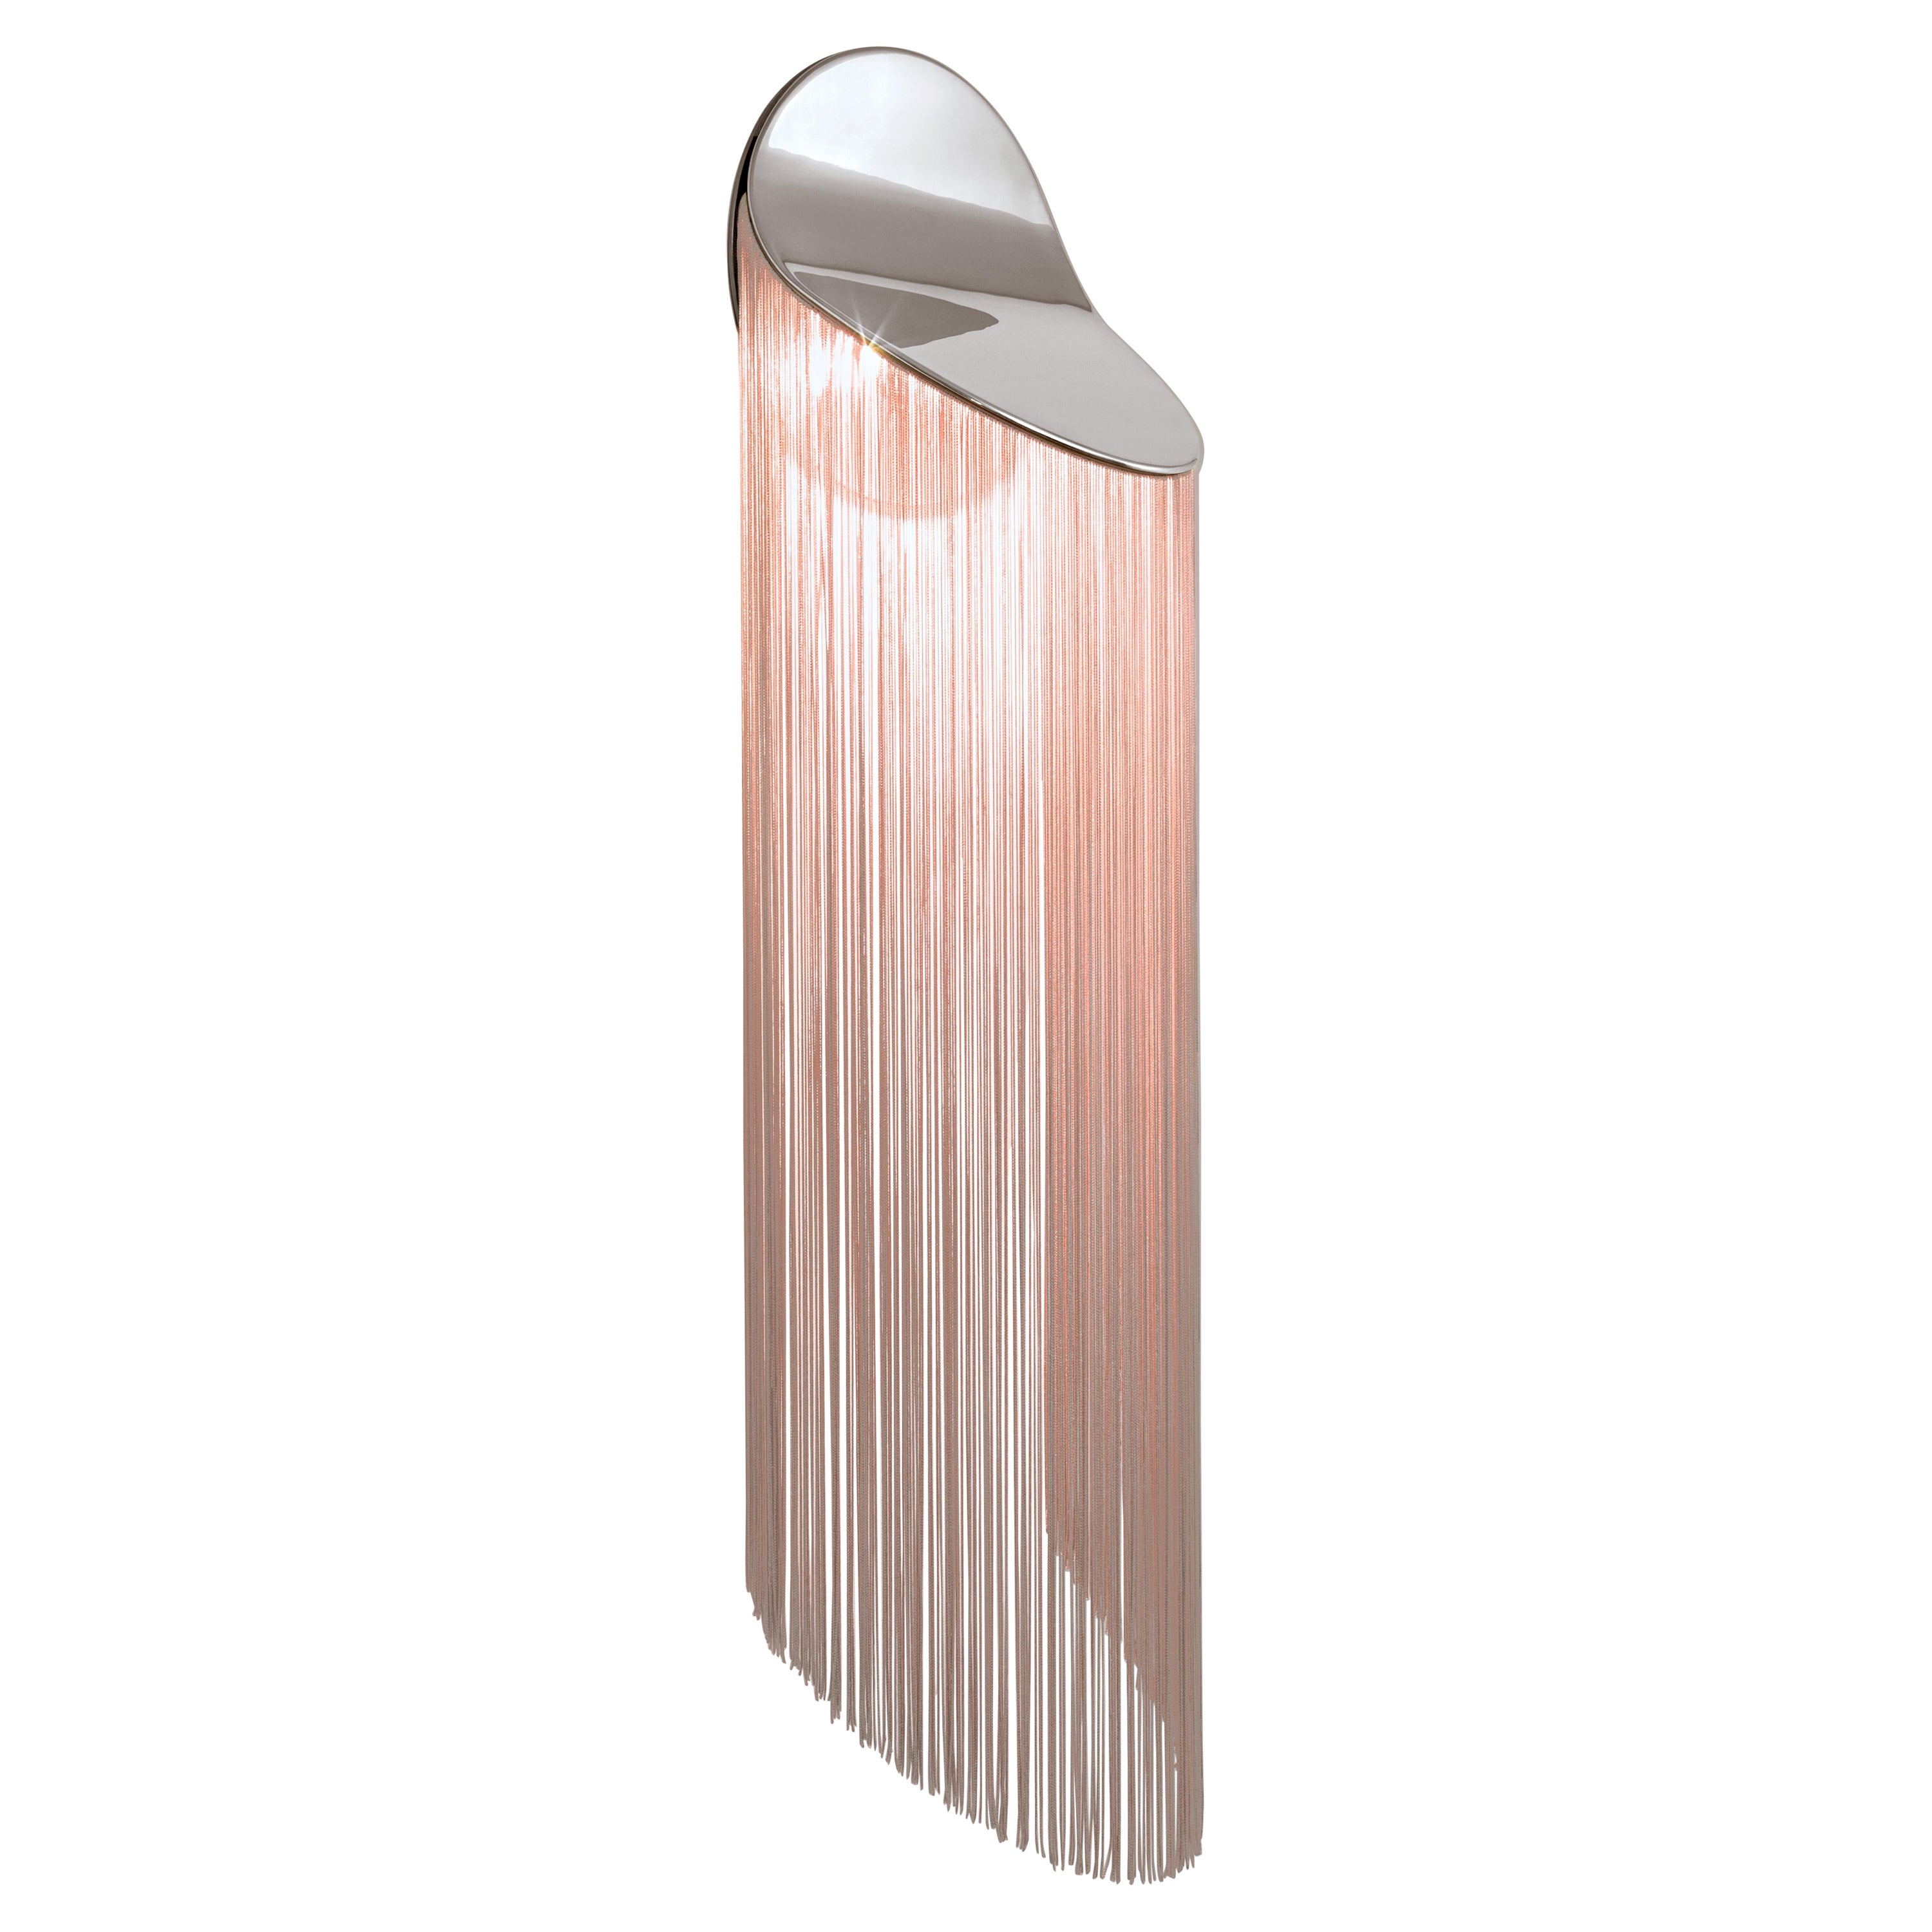 Cé Wall Chrome Wall Sconce Lamp with Tender Pink Rayon Fringes by d'Armes